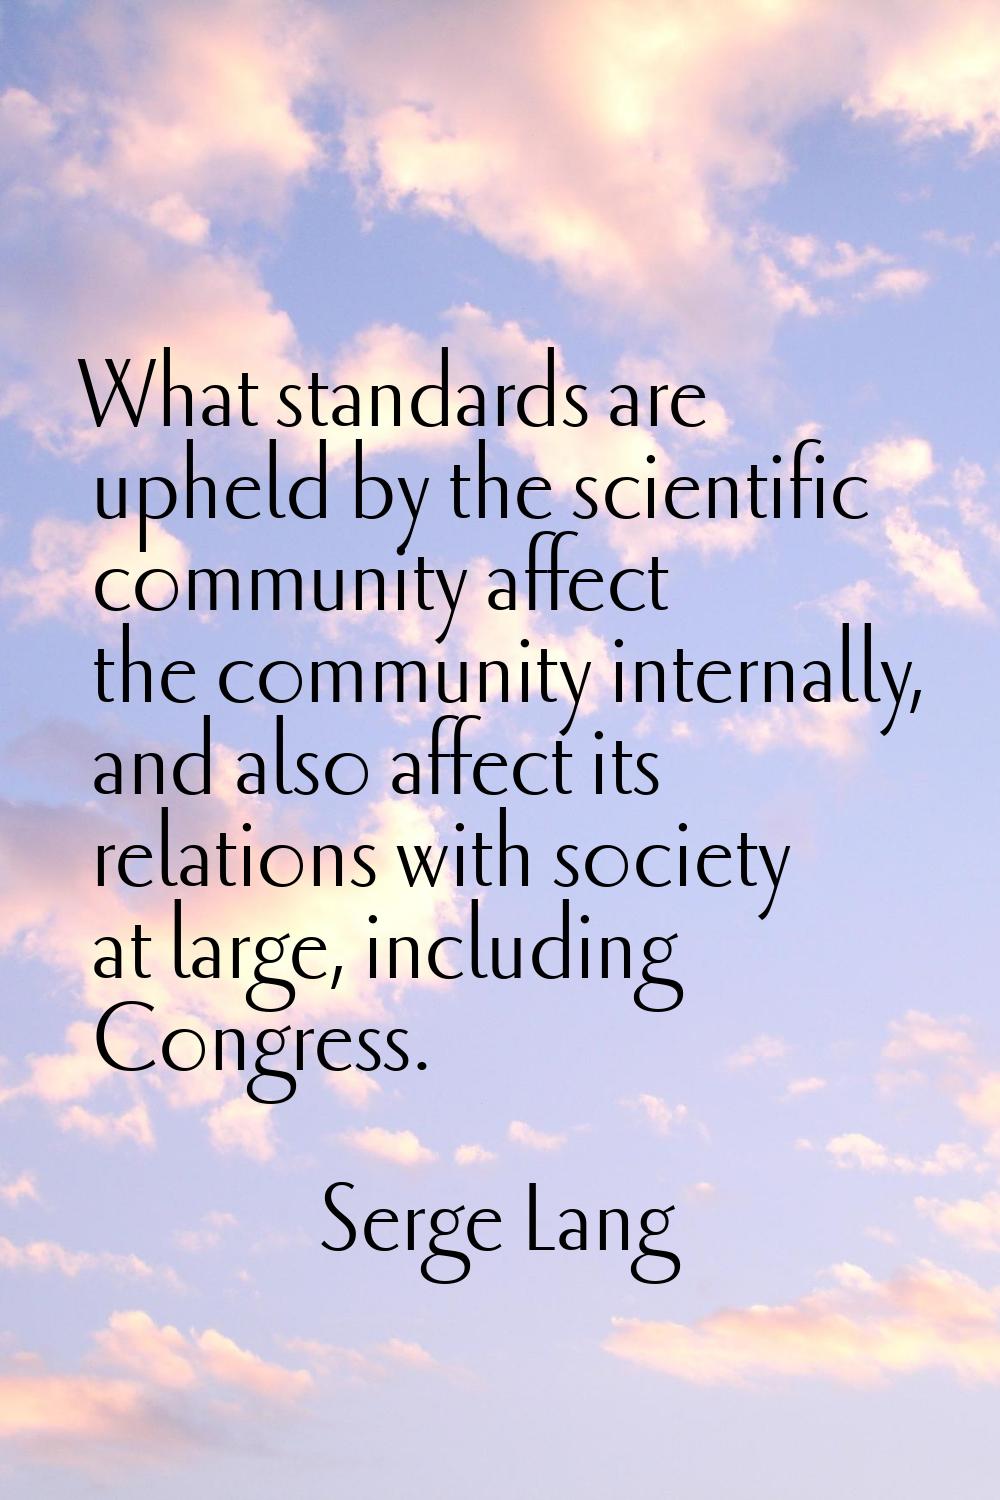 What standards are upheld by the scientific community affect the community internally, and also aff